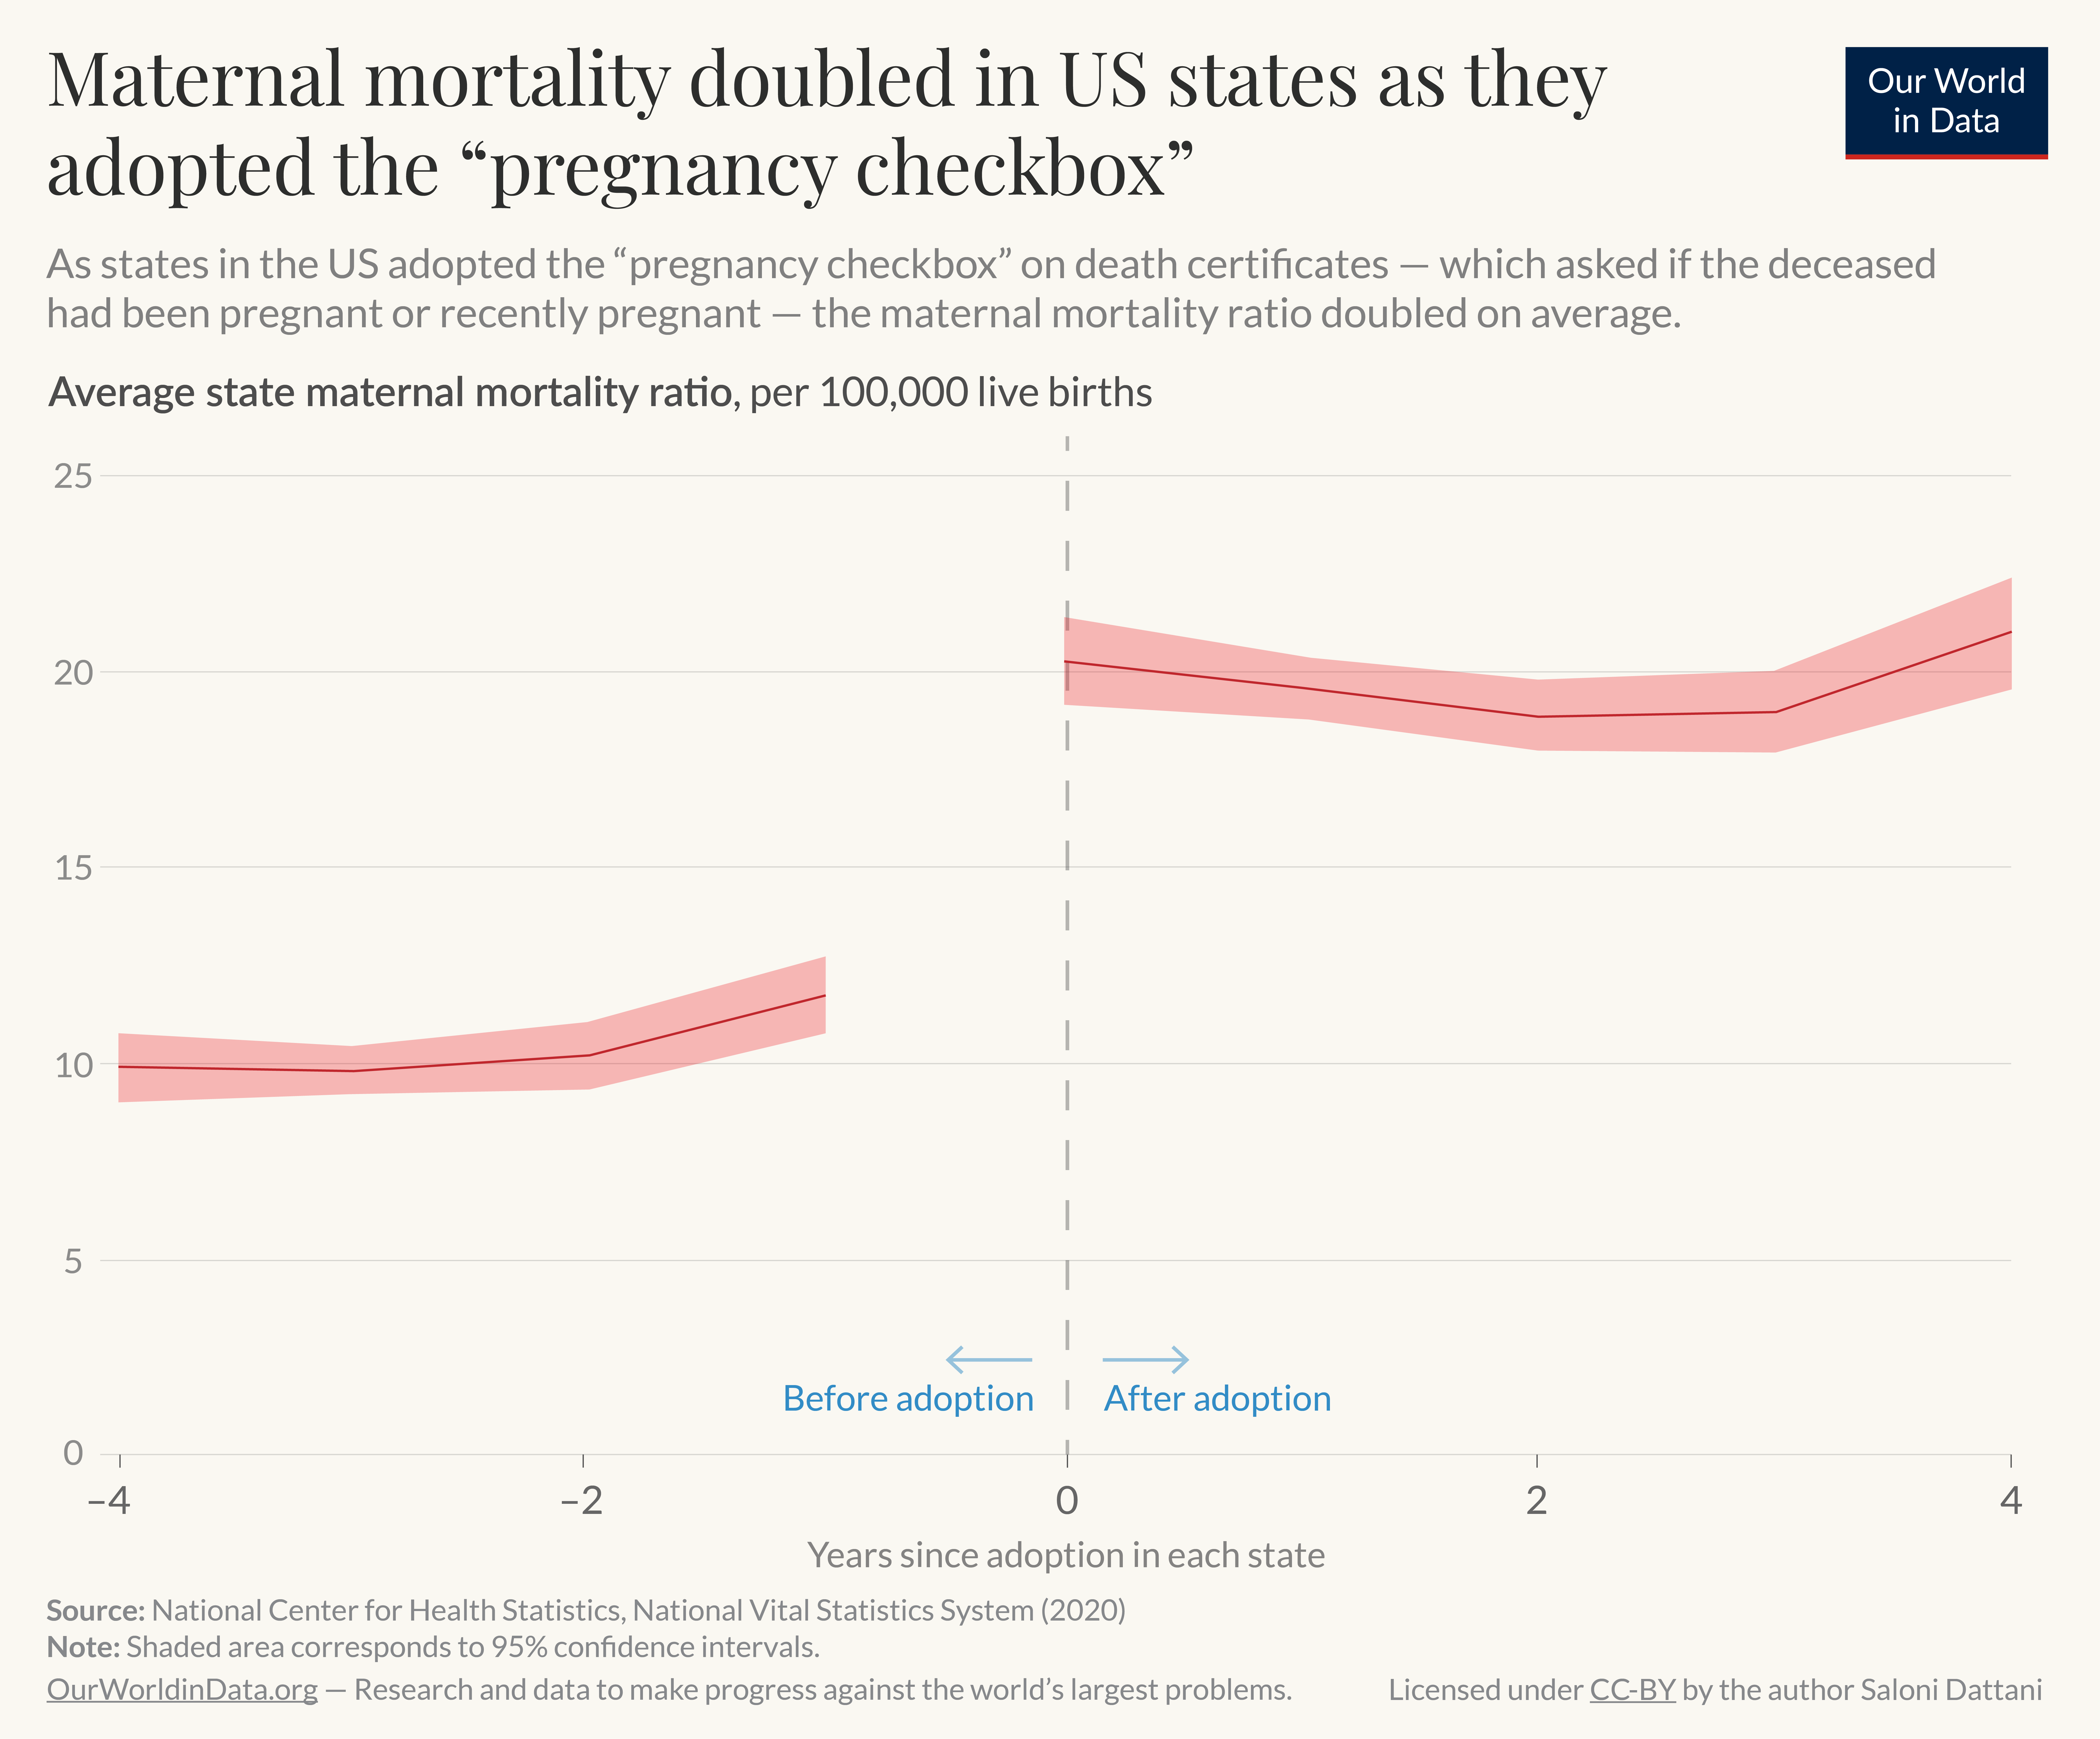 The image is a shaded line graph with the title "Maternal mortality doubled in US states as they adopted the “pregnancy checkbox”". It depicts the average state maternal mortality ratio per 100,000 live births in relation to the years surrounding the adoption of the pregnancy checkbox on death certificates in US states. 

The graph shows a marked increase in maternal mortality in the year following the adoption of the pregnancy checkbox. Before adoption, the maternal mortality ratio appears to be relatively stable, but after the checkbox is implemented, there is a sudden shift upwards, and then the rate remains relatively stable.

Below the graph is a source note attributing the data to the National Center for Health Statistics, National Vital Statistics System (2020).